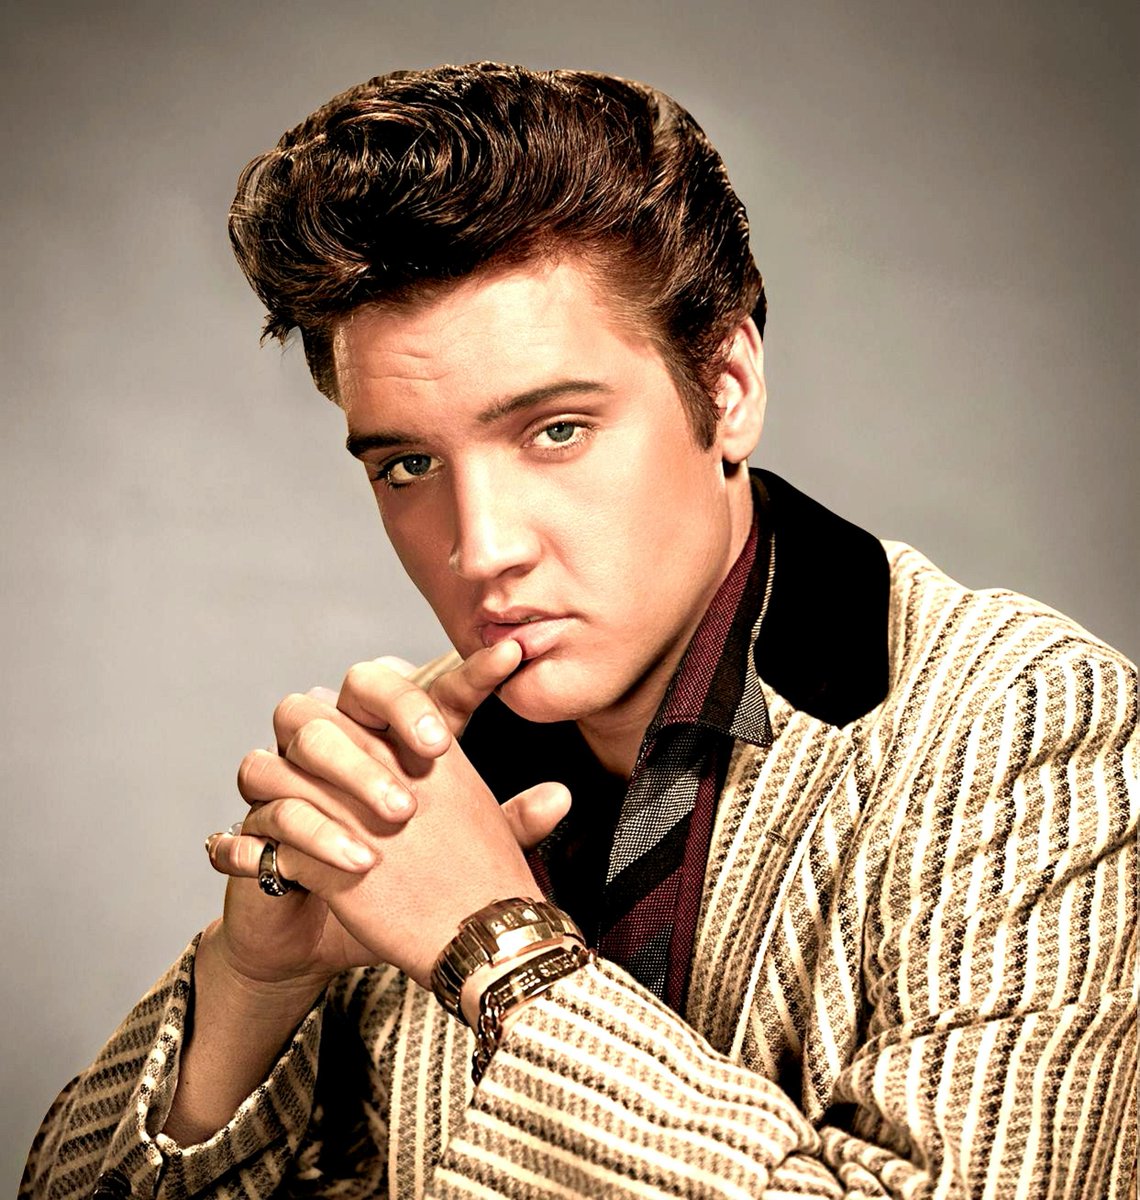 without saying don't be cruel, fav elvis presley song?